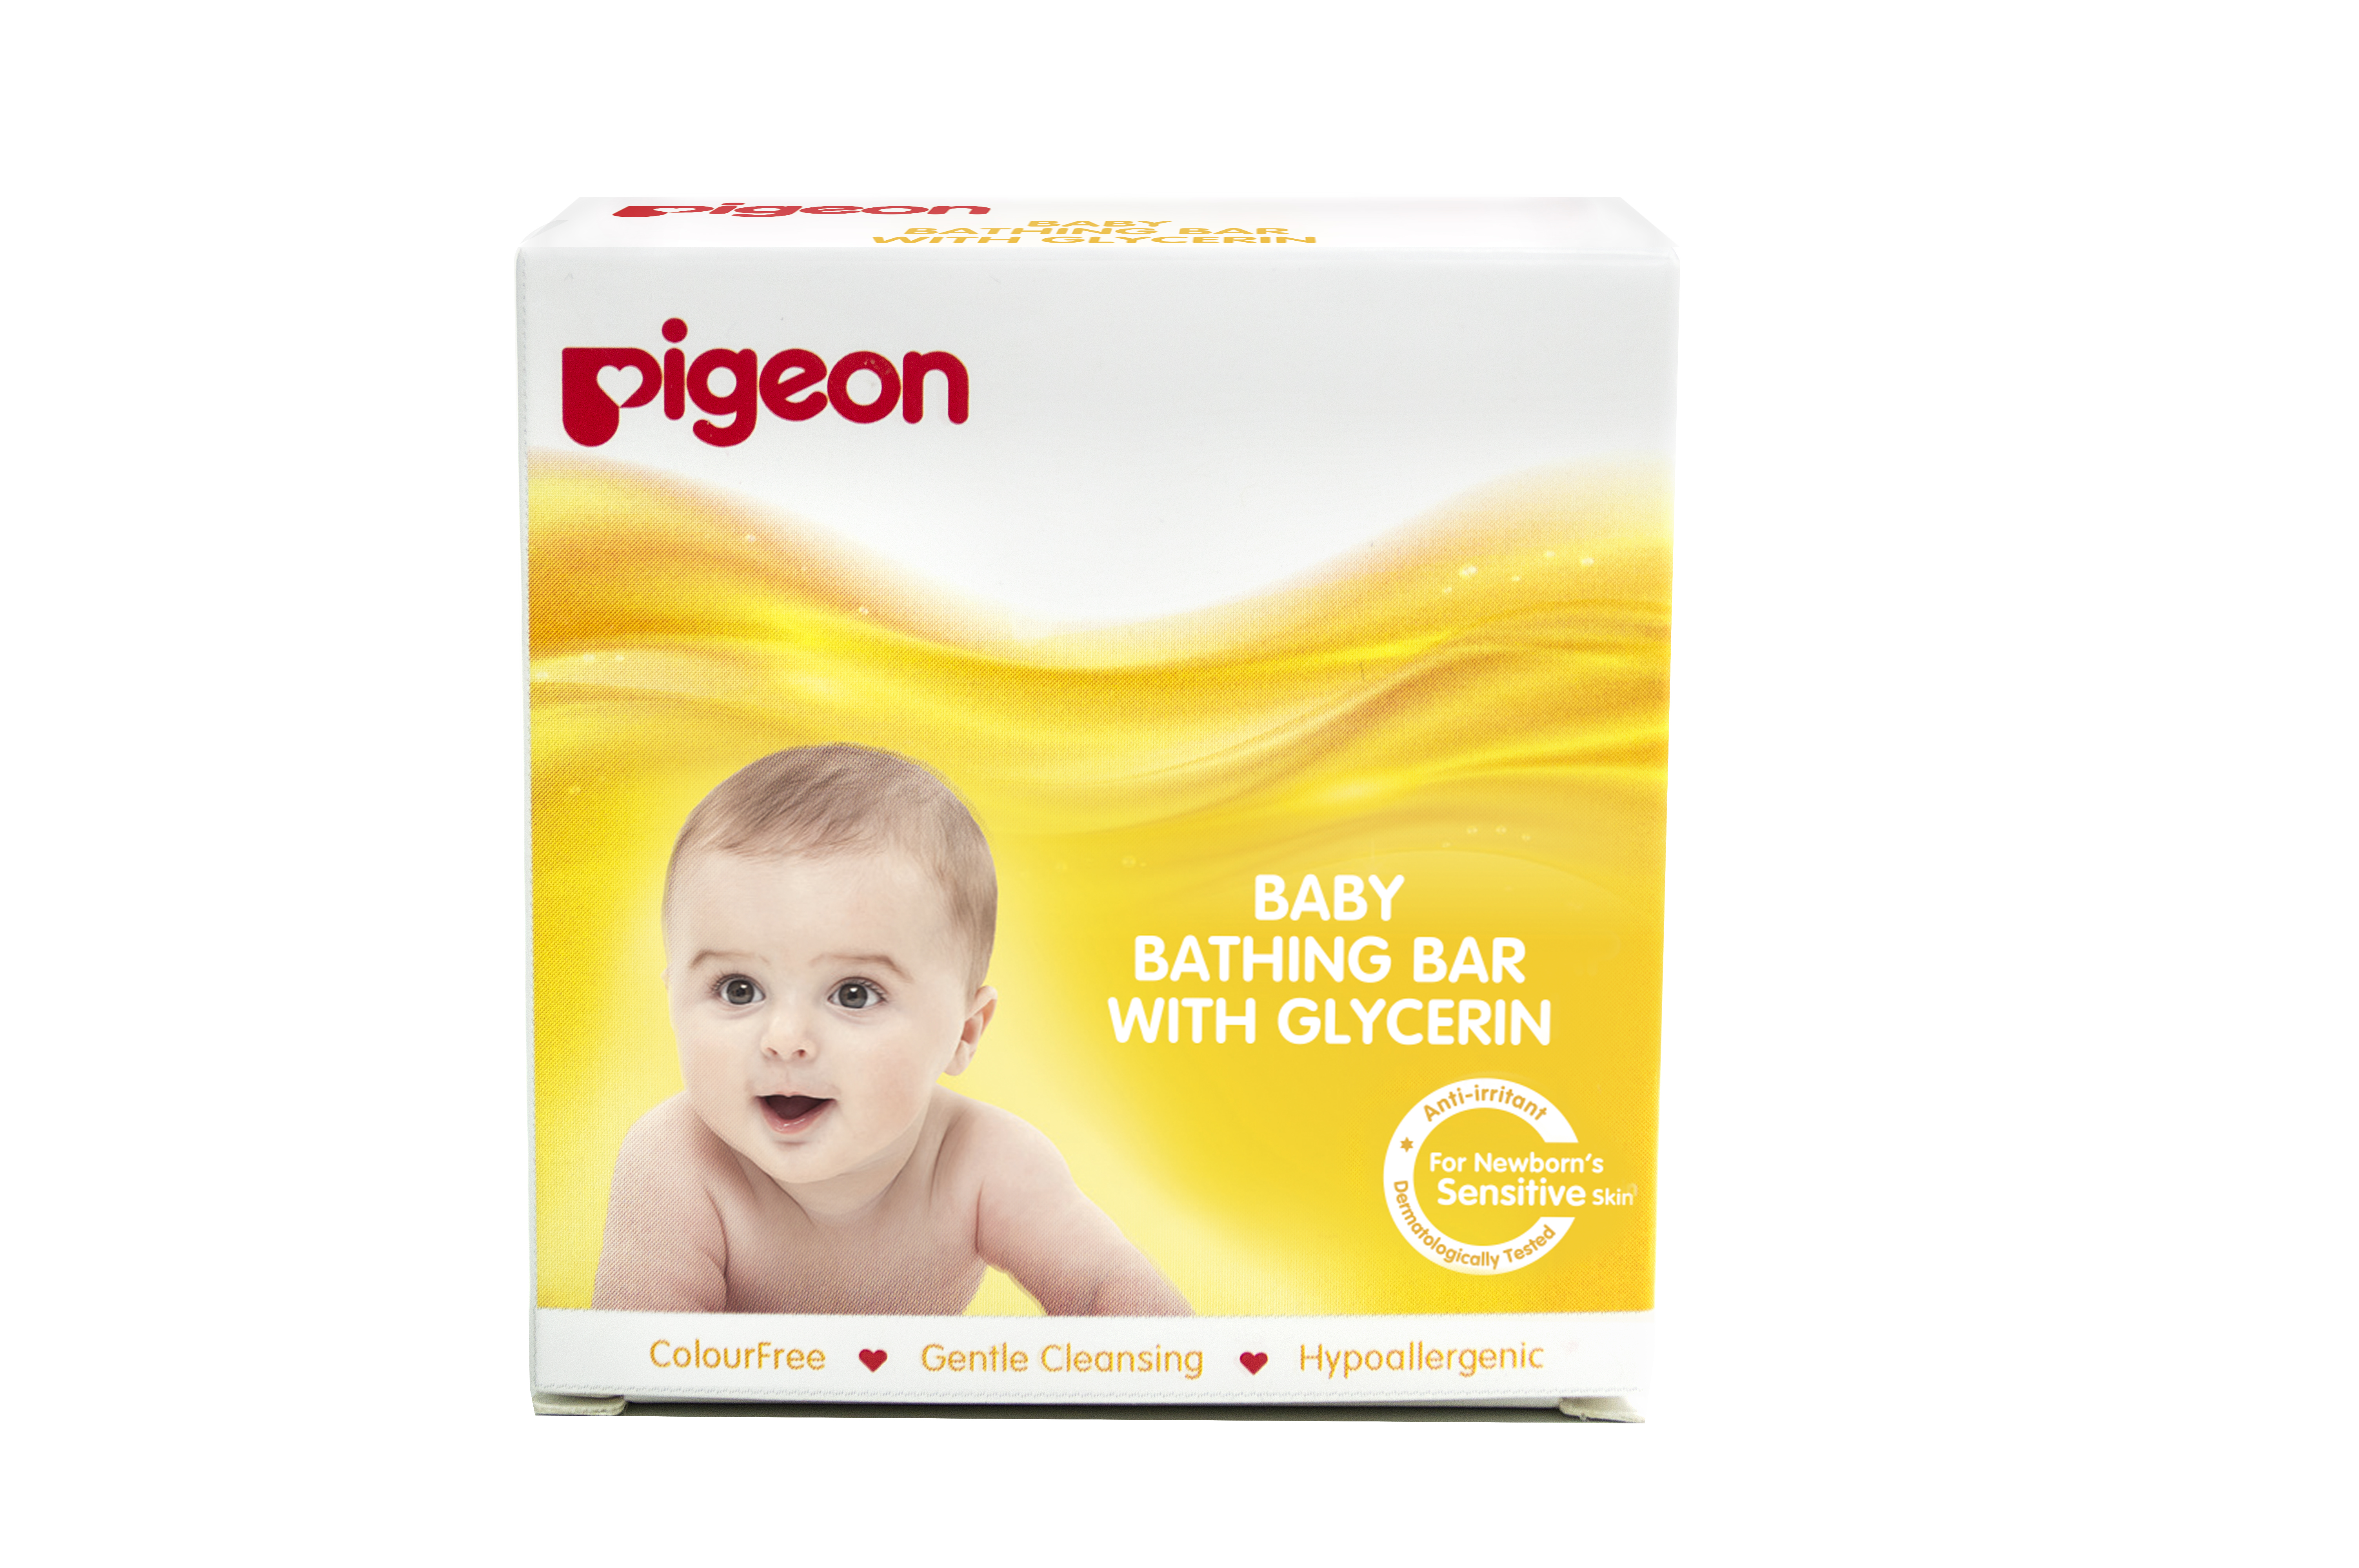 Baby Bathing Bar With Glycerin - Pigeon